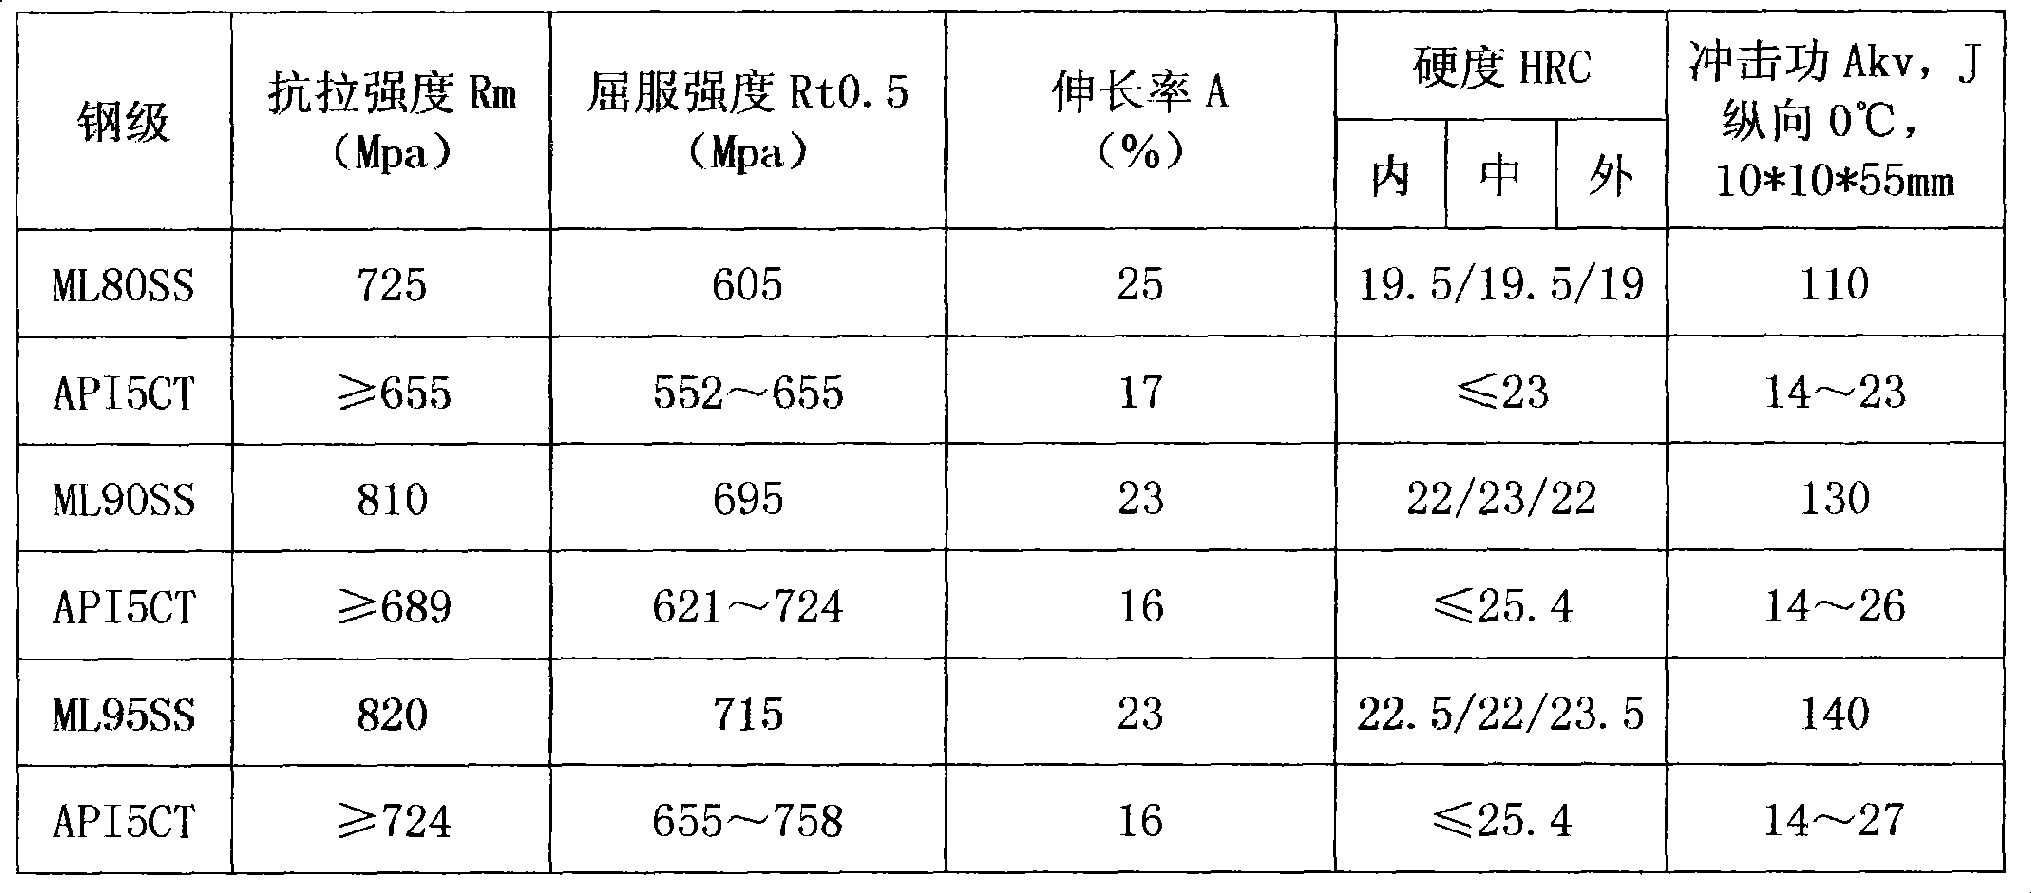 Medium and high strength oil casing for resisting sulfurated hydrogen corrosion and manufacturing method thereof